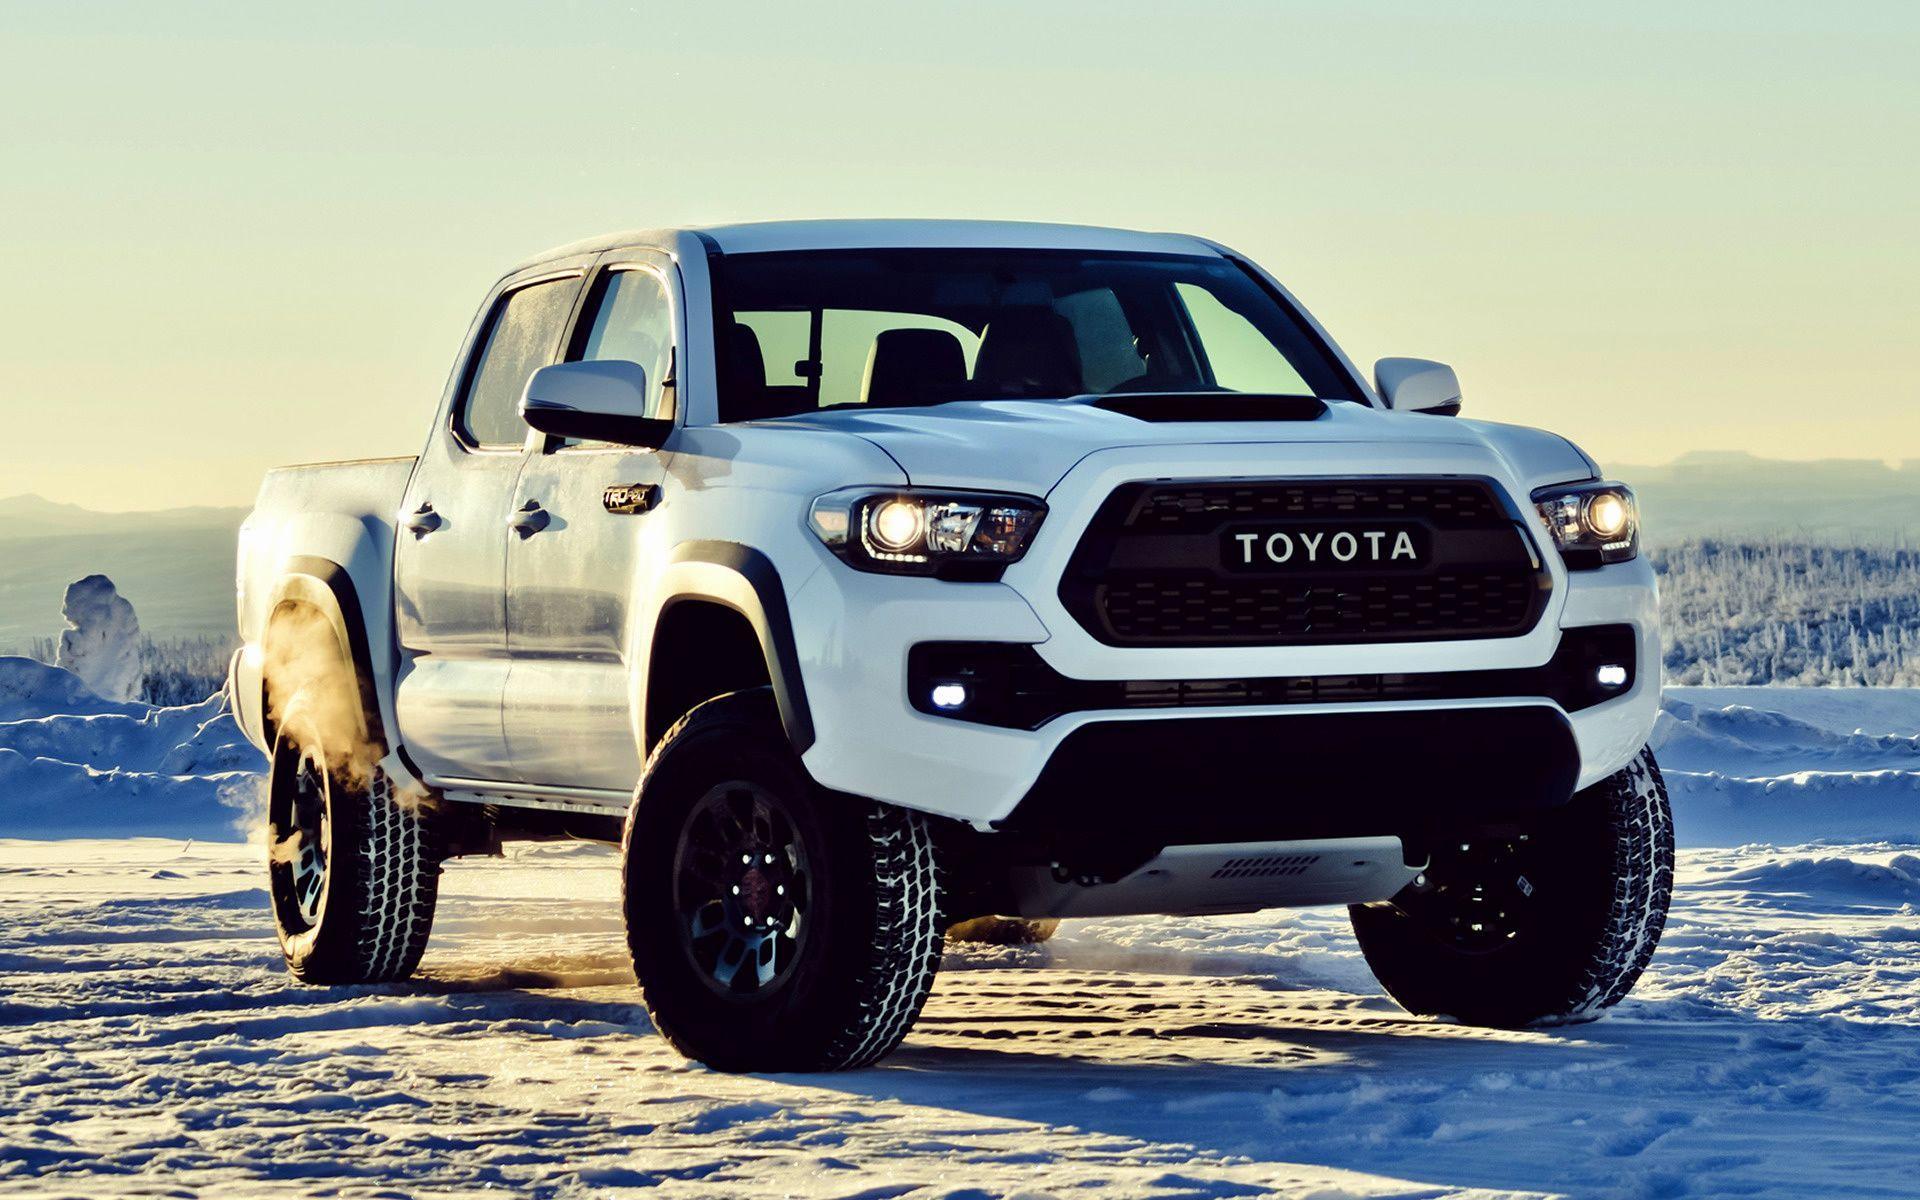 Toyota Truck Wallpapers Top Free Toyota Truck Backgrounds Wallpaperaccess